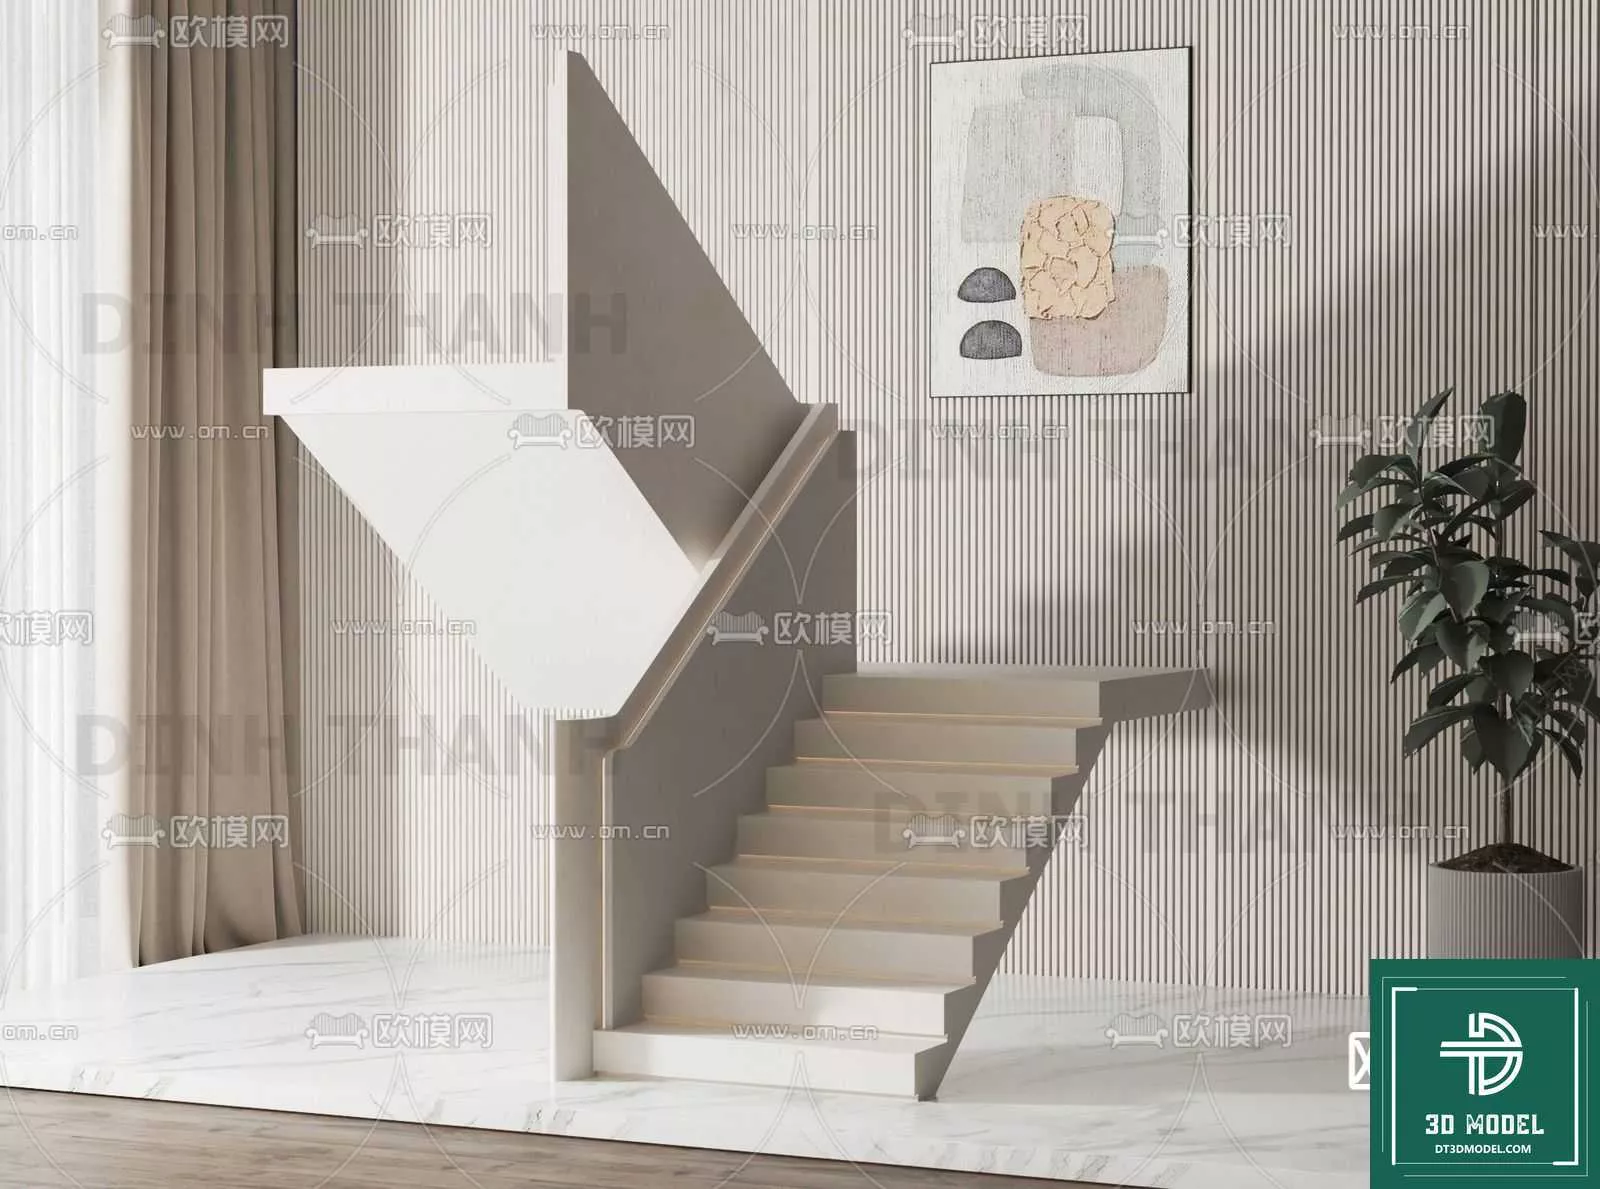 MODERN STAIR - SKETCHUP 3D MODEL - VRAY OR ENSCAPE - ID14222